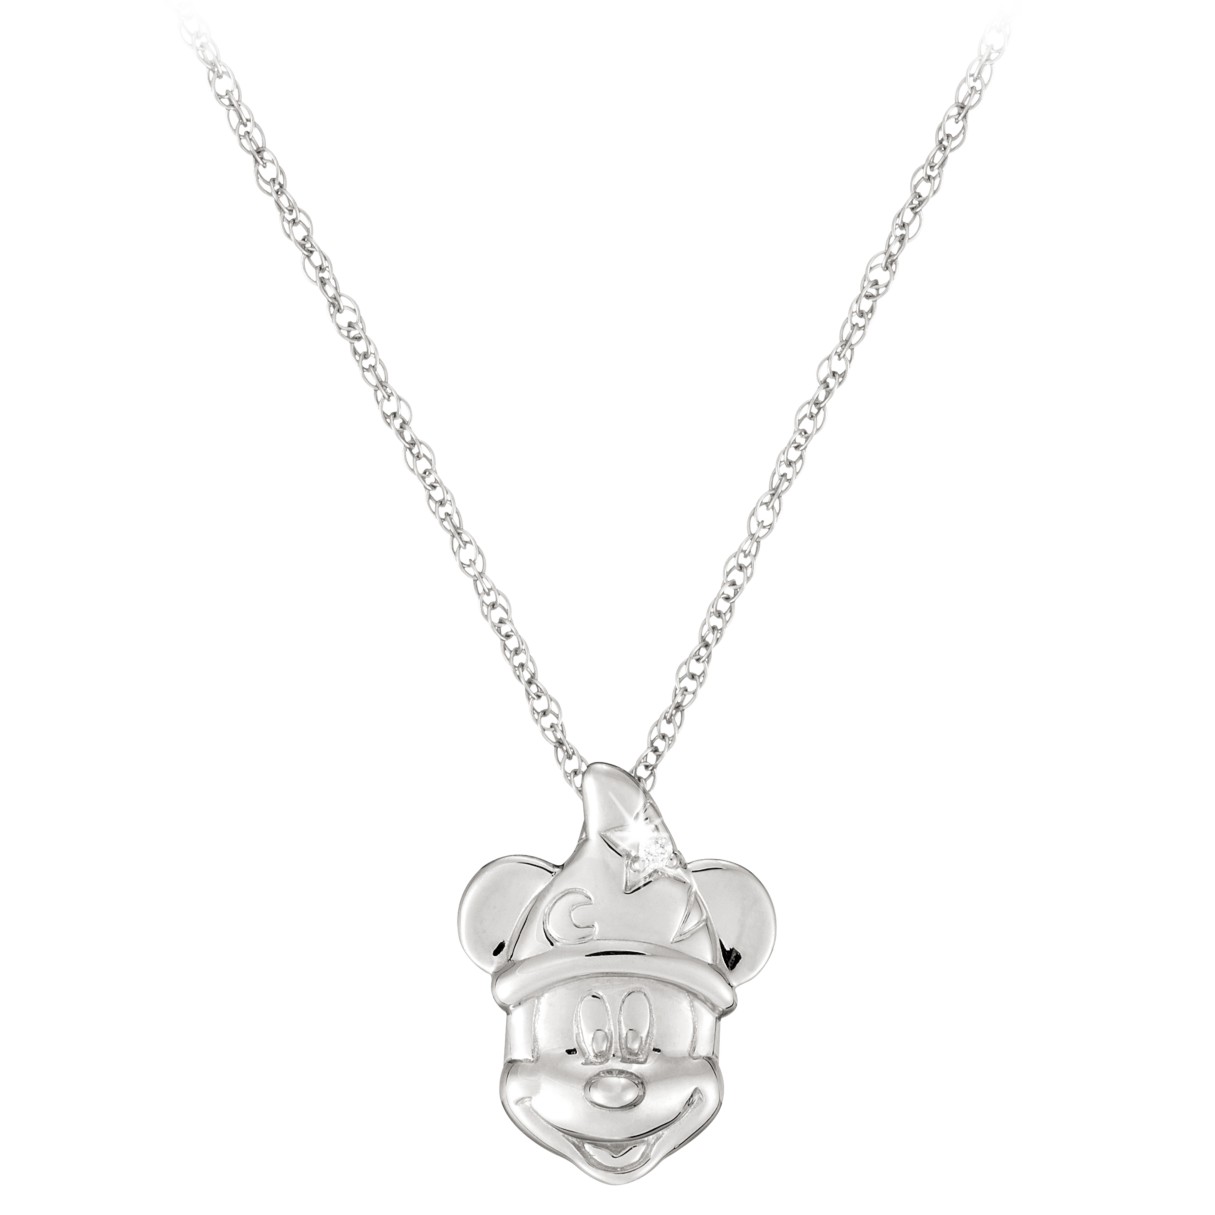 Sorcerer Mickey Mouse Necklace